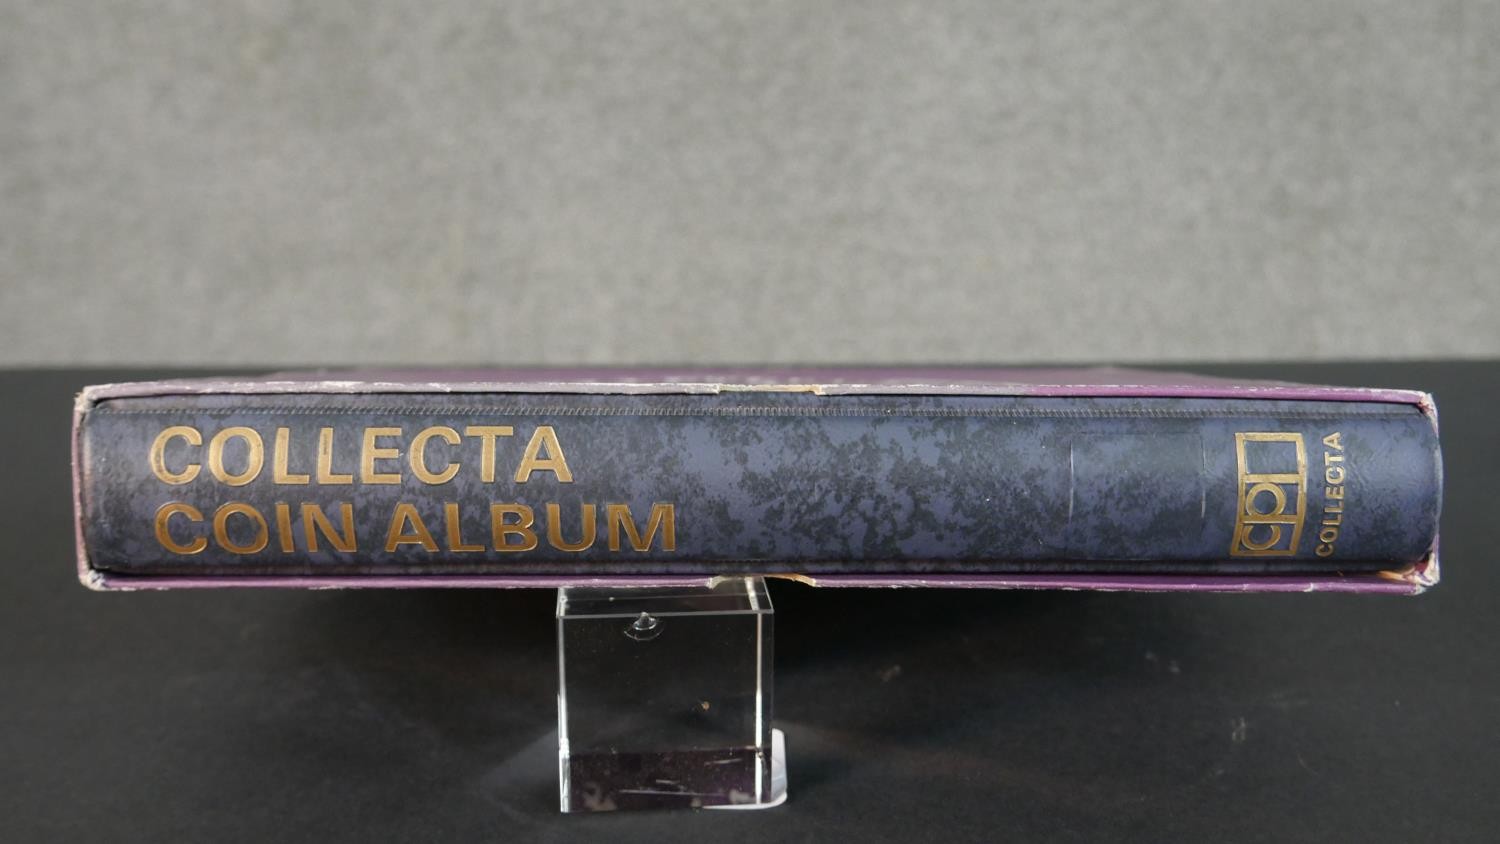 An album of world stamps along with a British Collecta coin album filled with various British coins. - Image 15 of 15